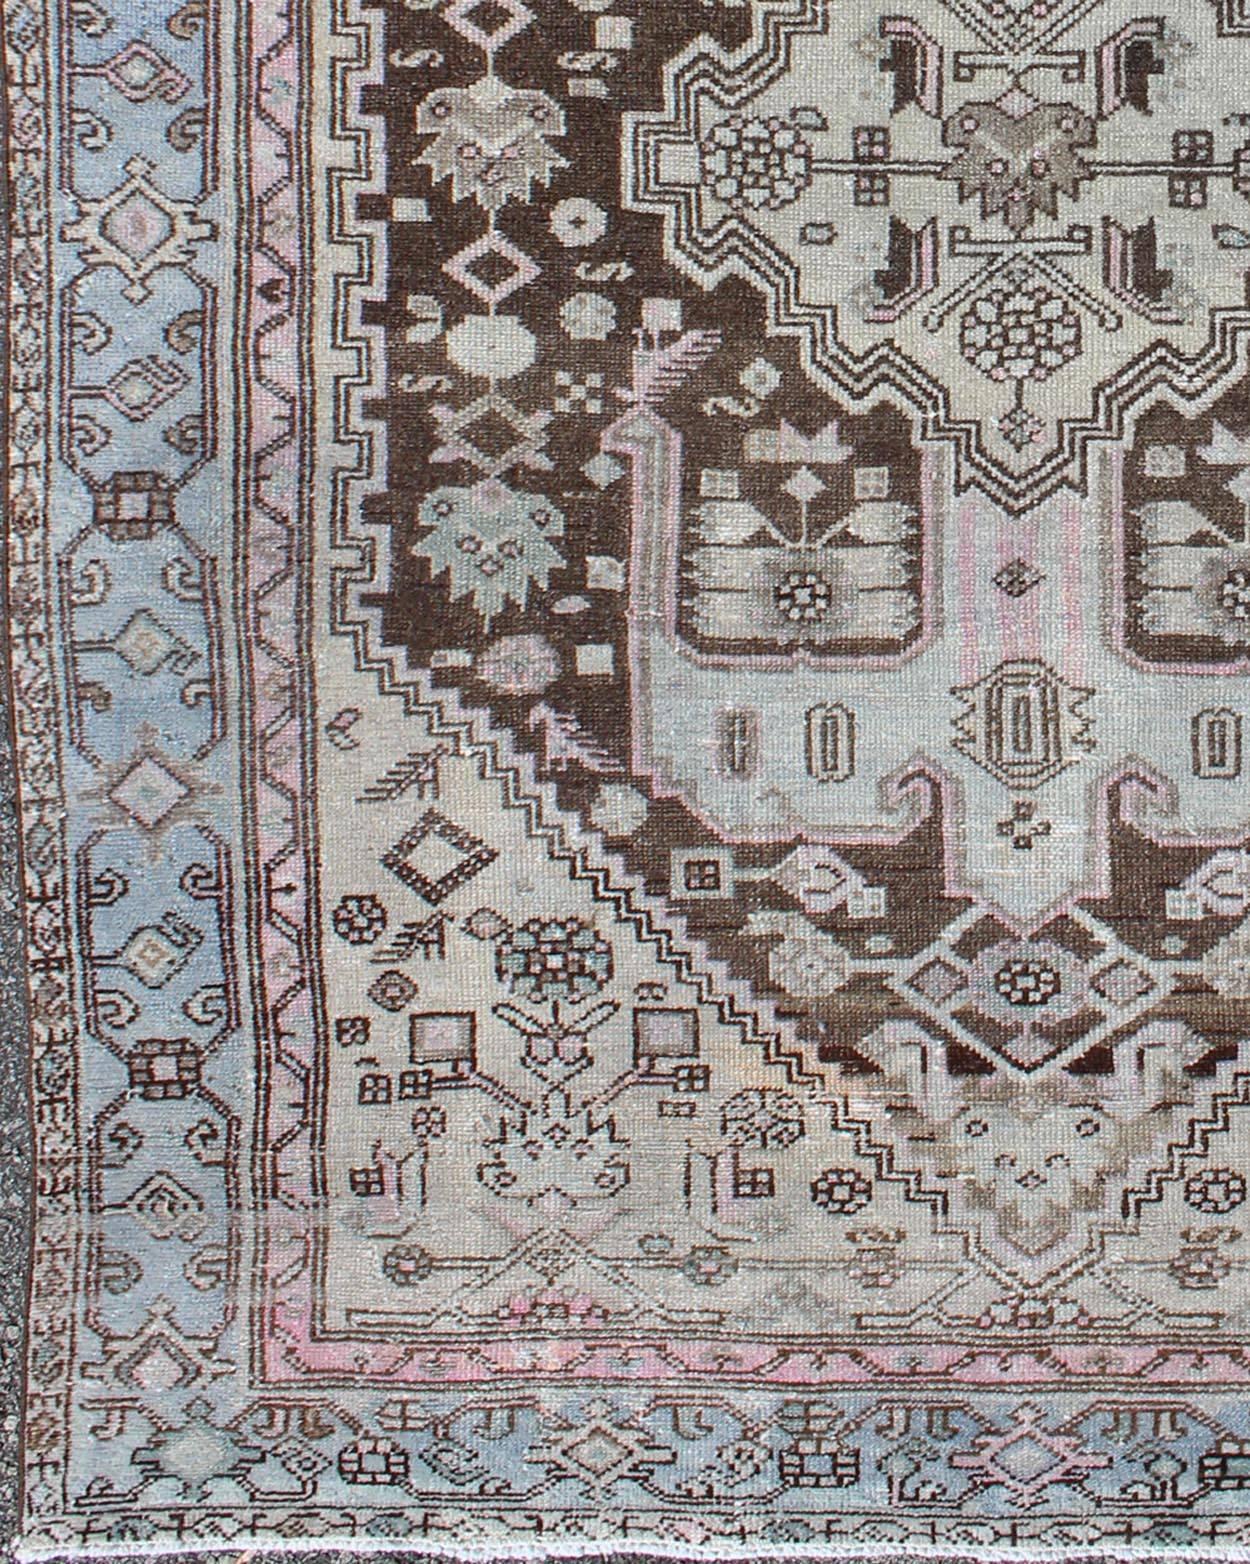 Antique Hamadan rug with geometric medallion in blue, pink, chocolate, Keivan Woven Arts / rug 17-0702, country of origin /  Hamadan, circa 1930.

This magnificent Hamadan features beautiful coloration, including tones of ice blue, light pink, and